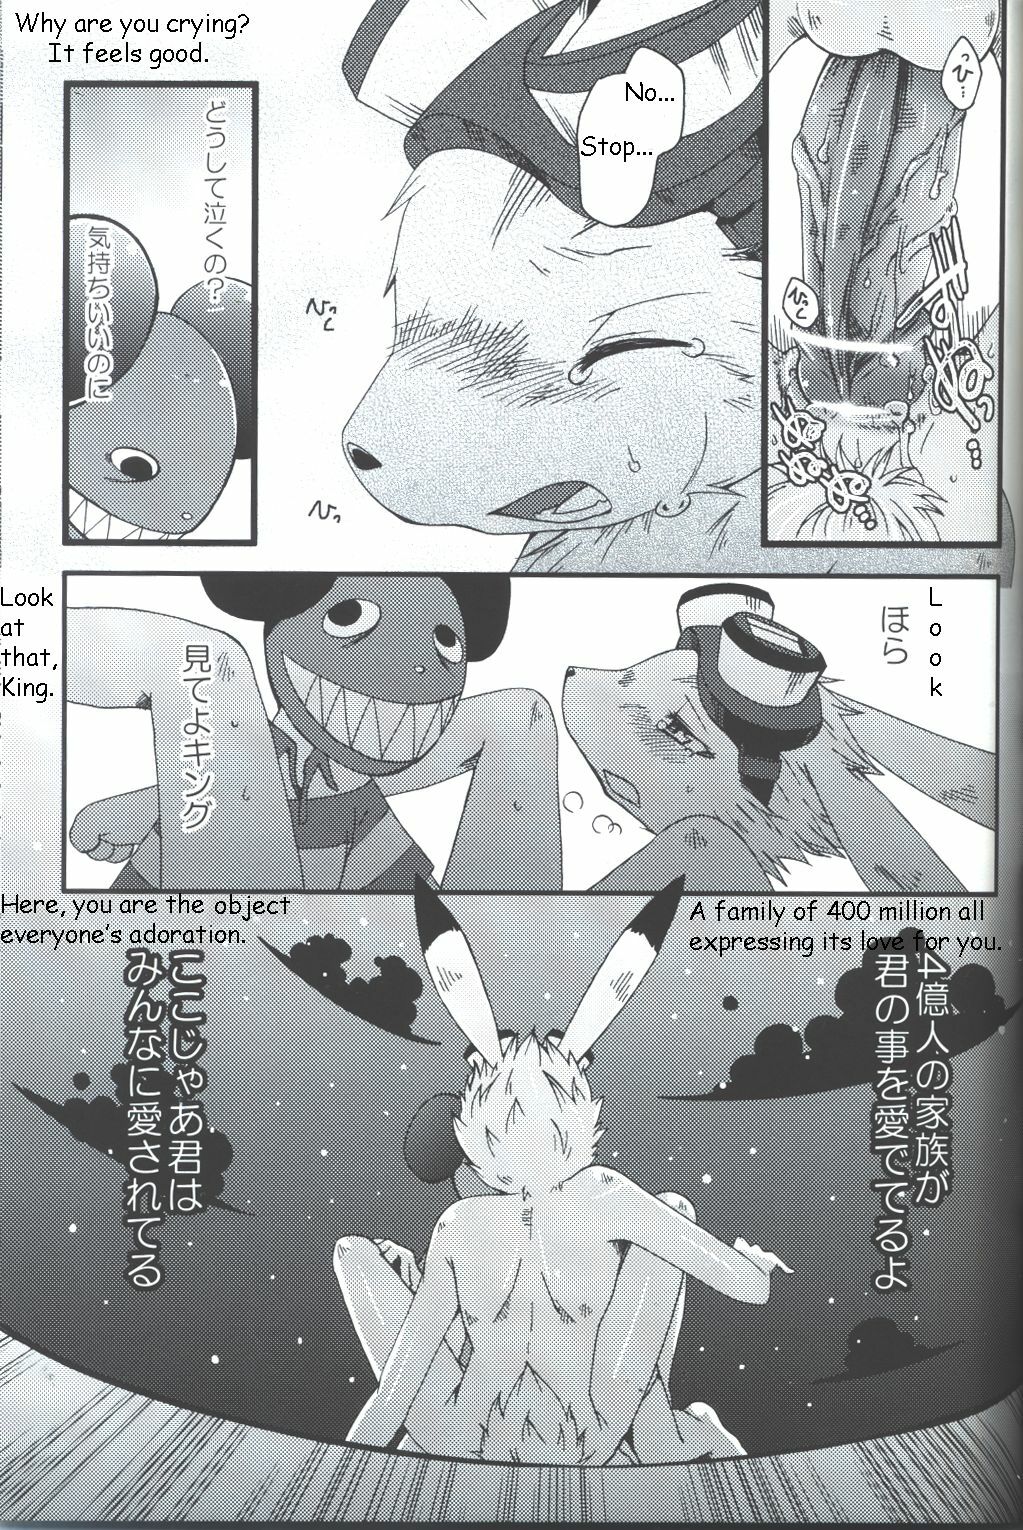 [Dogear (Inumimi Moeta)] Requirements of the King (Summer Wars) [English] page 15 full